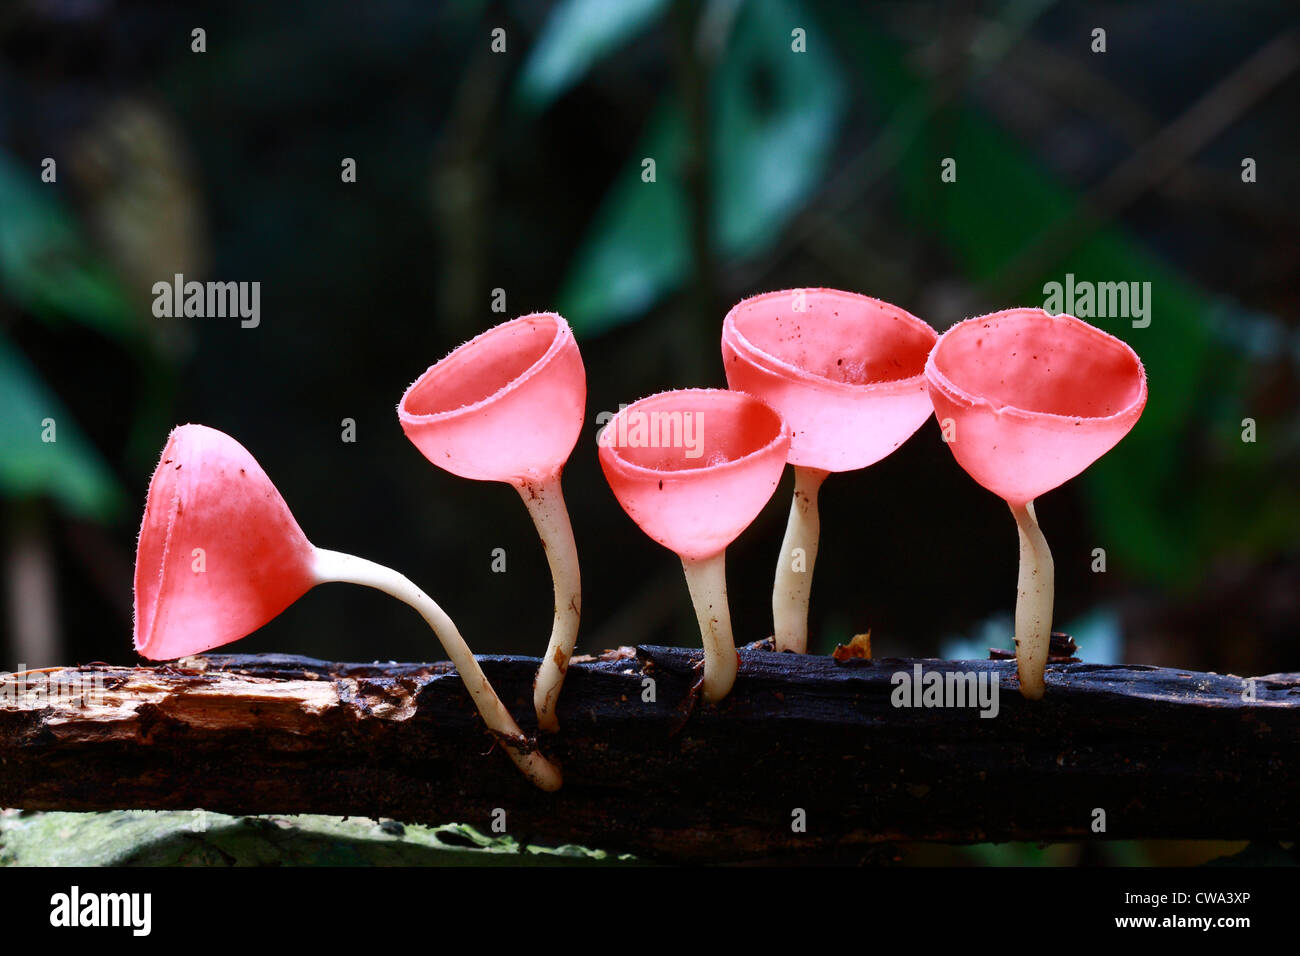 Pink Burn Cup, Fungi Cup mushroom in forest Stock Photo